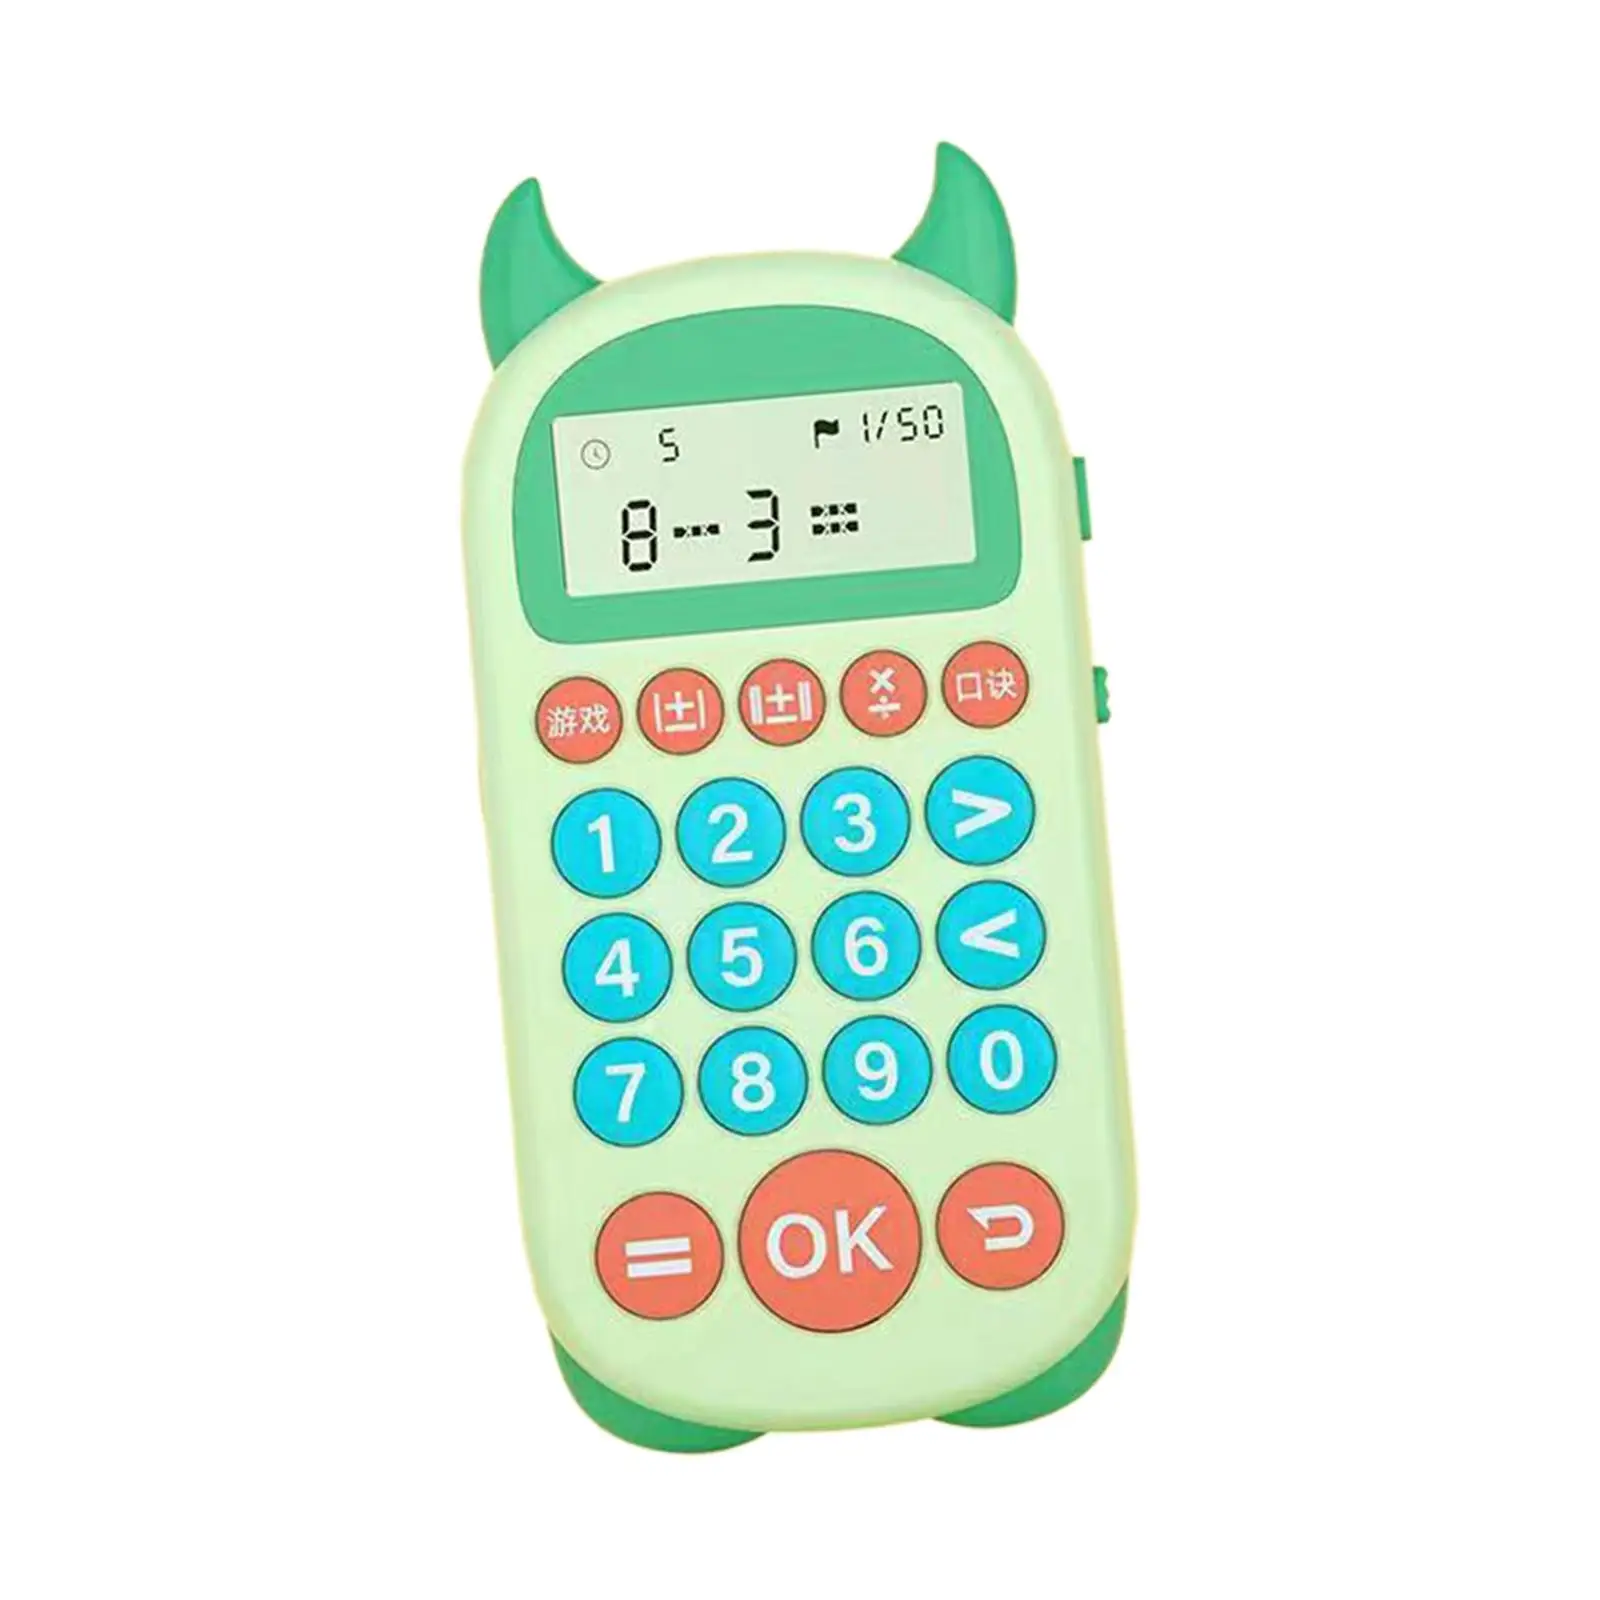 Portable Electronic Calculator Functional Math Calculation Teaching Aids Electronic Math Game for Students Toddler Children Kids